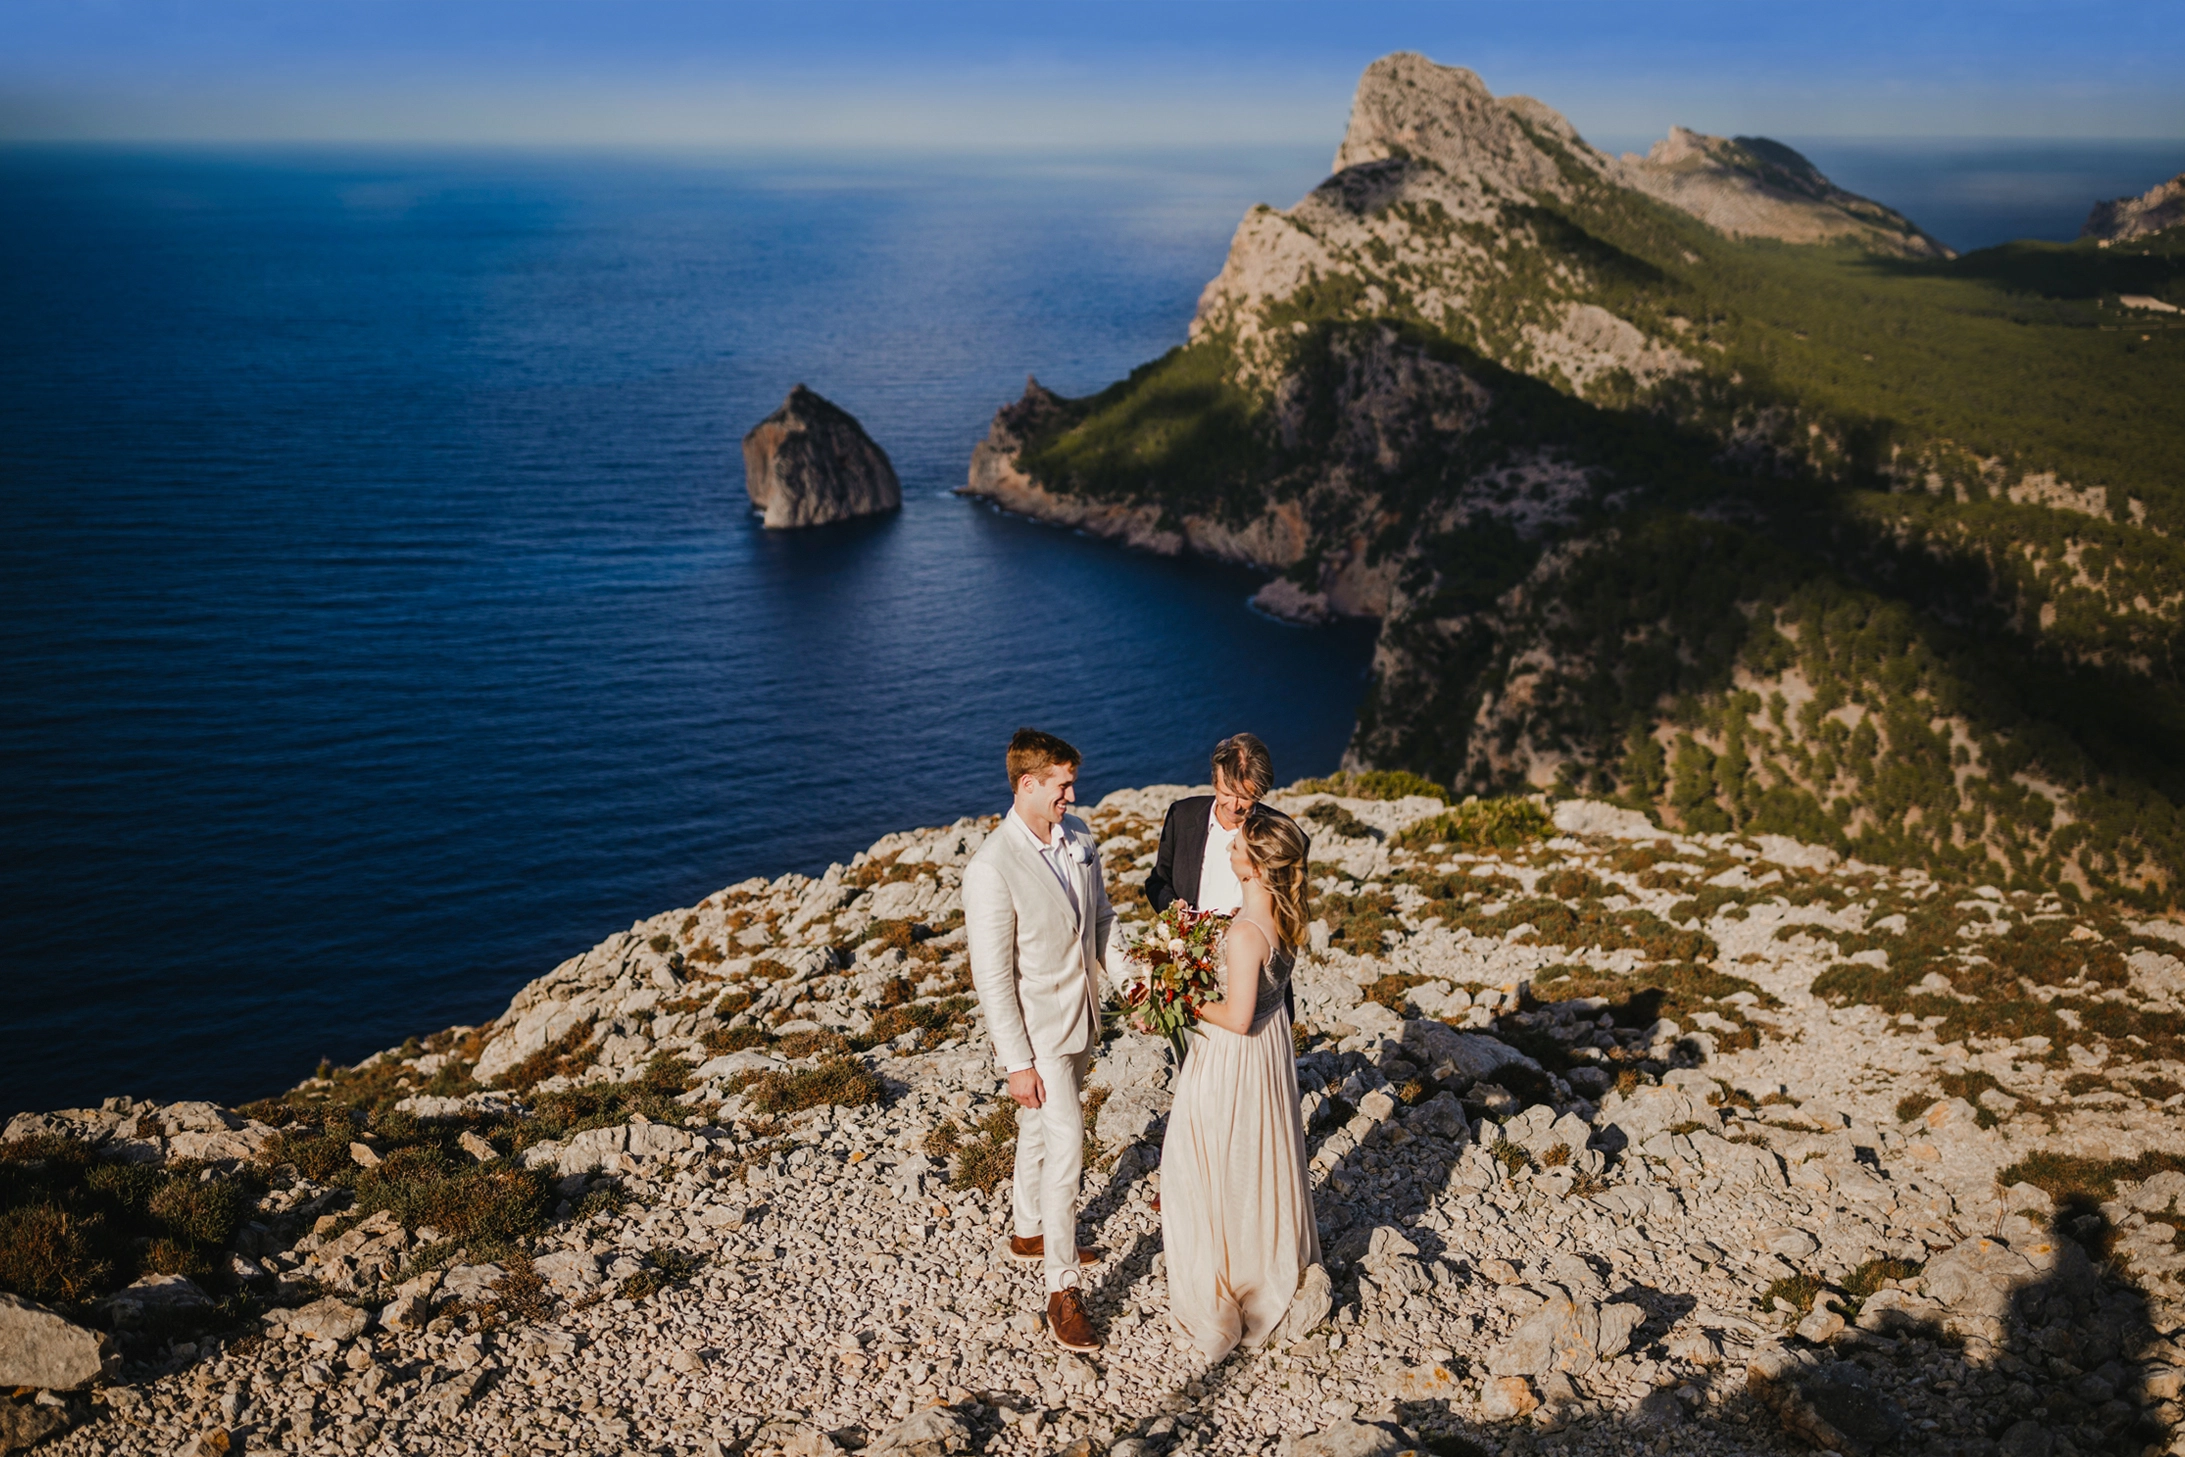 cabo de formentor is the perfect venue for an elopement ceremony